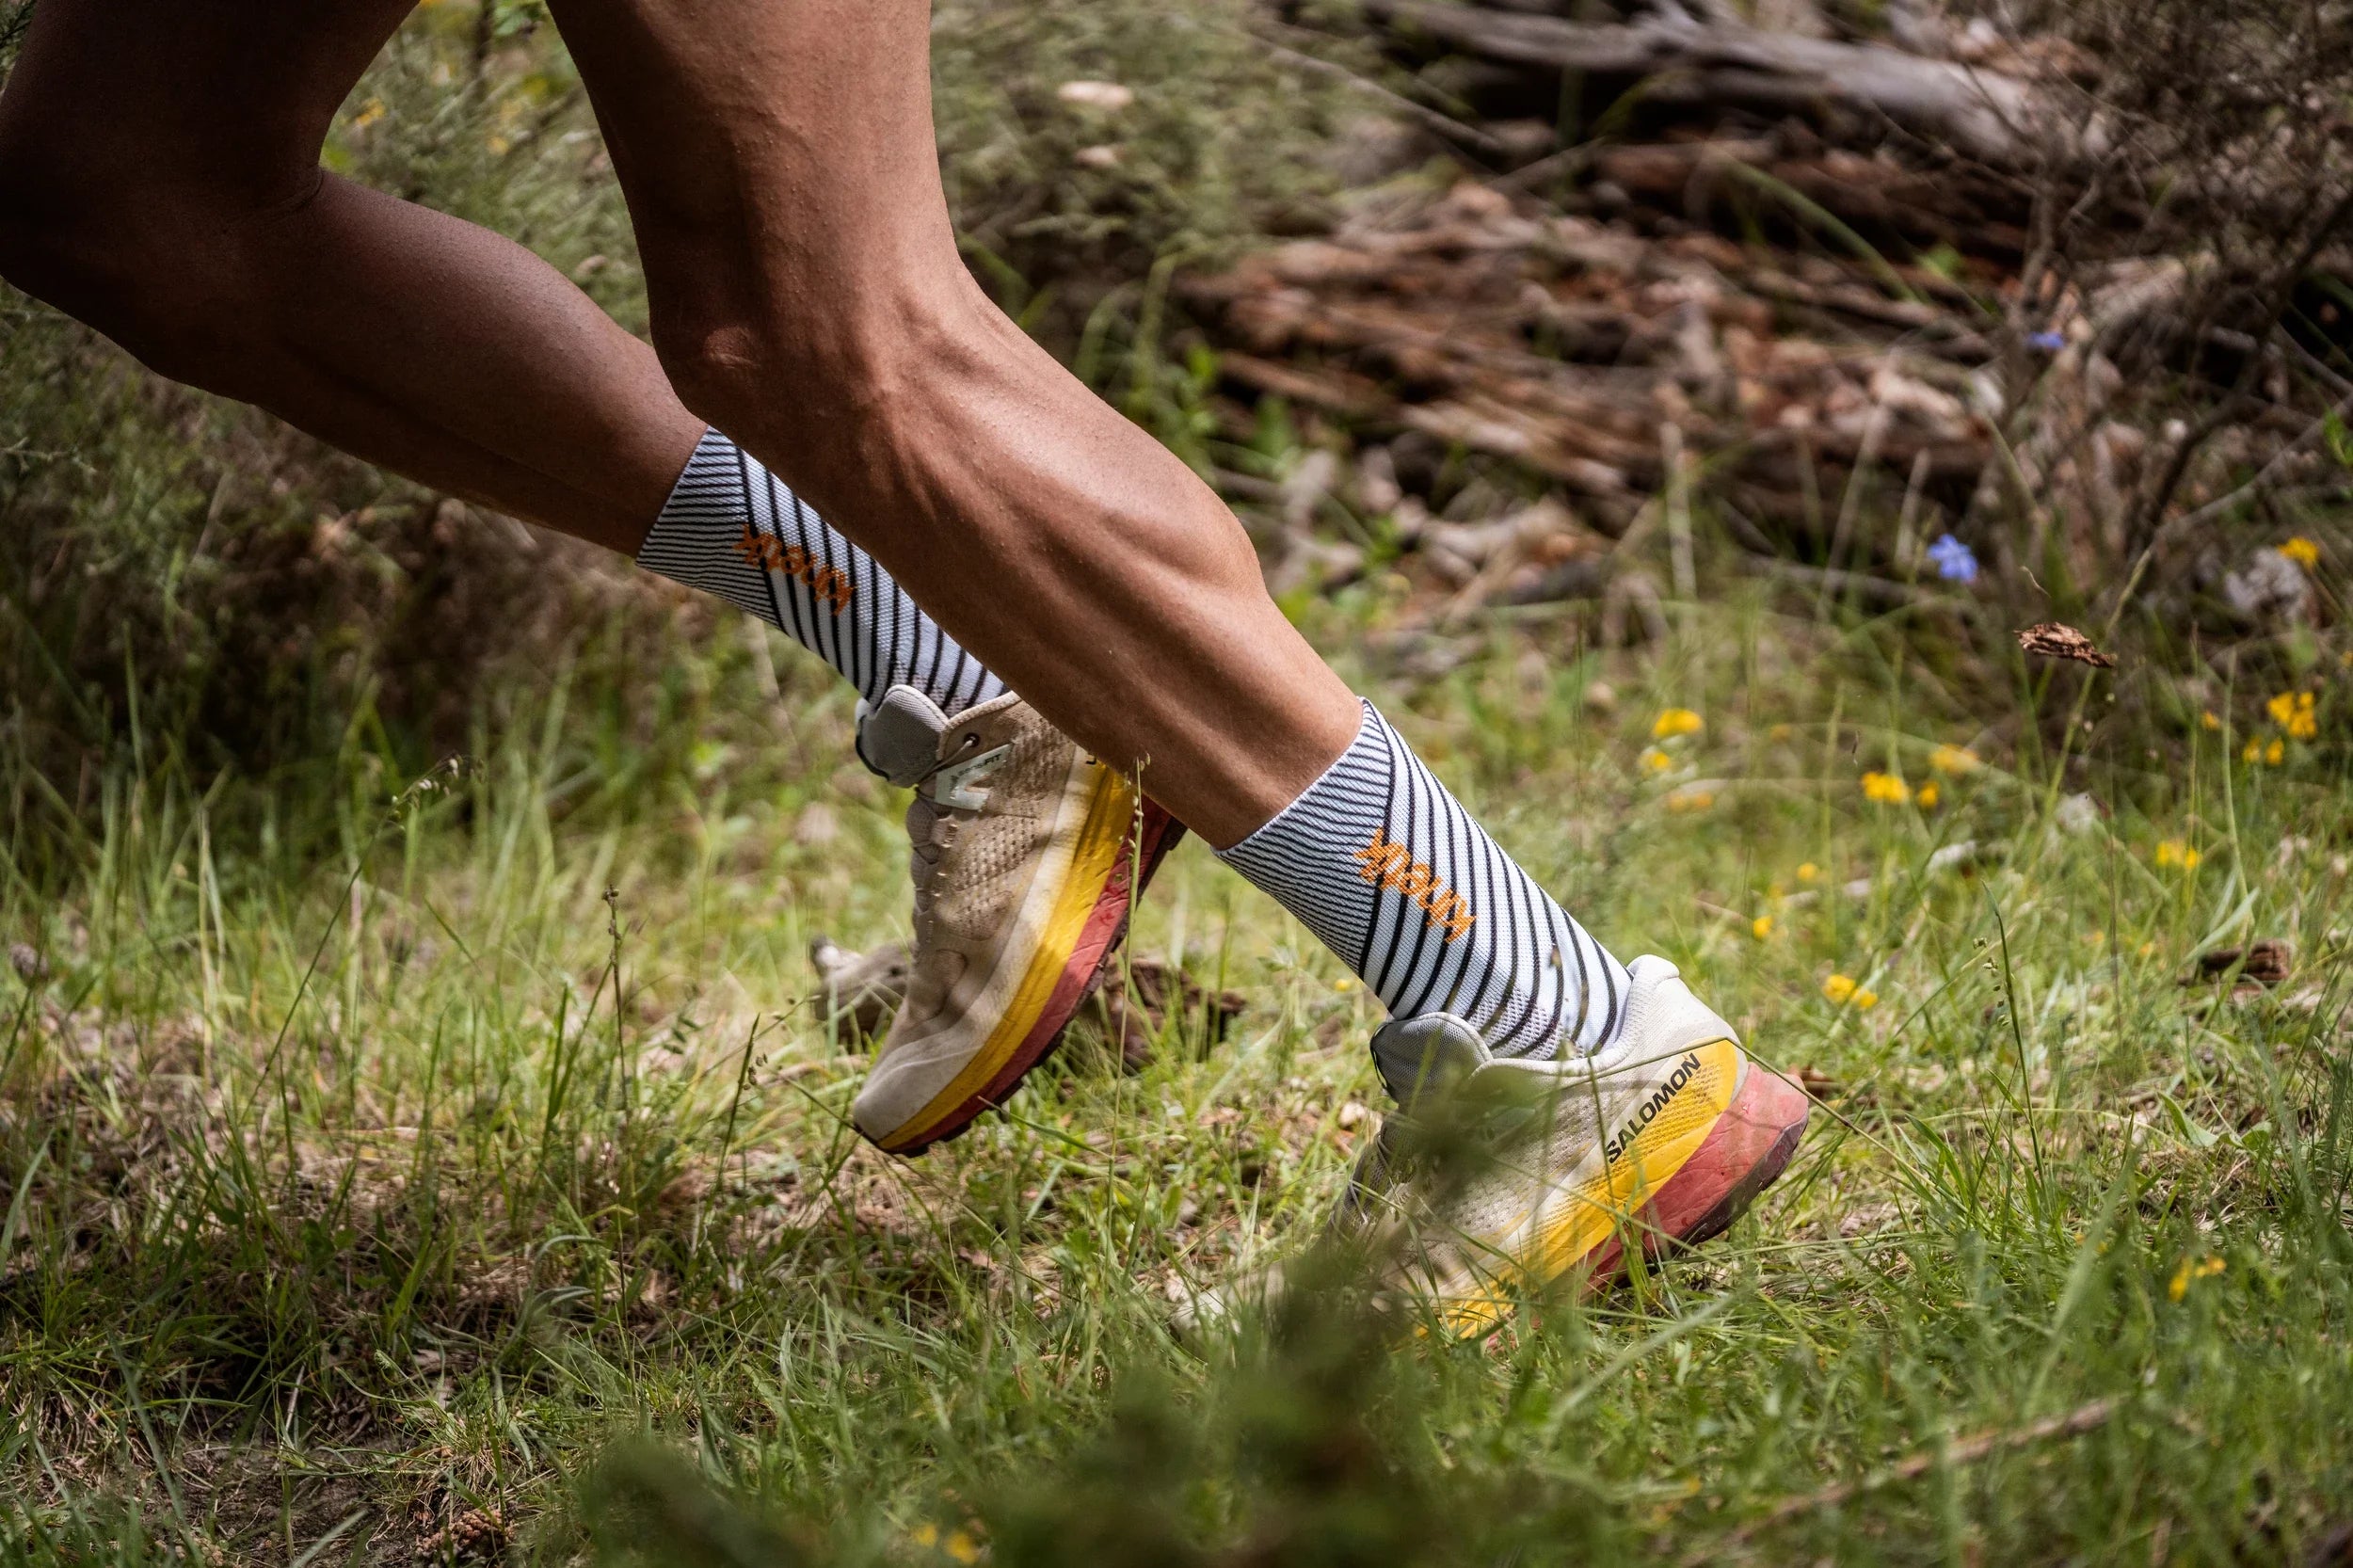 Calcetines para trail running, Calcetines para trail